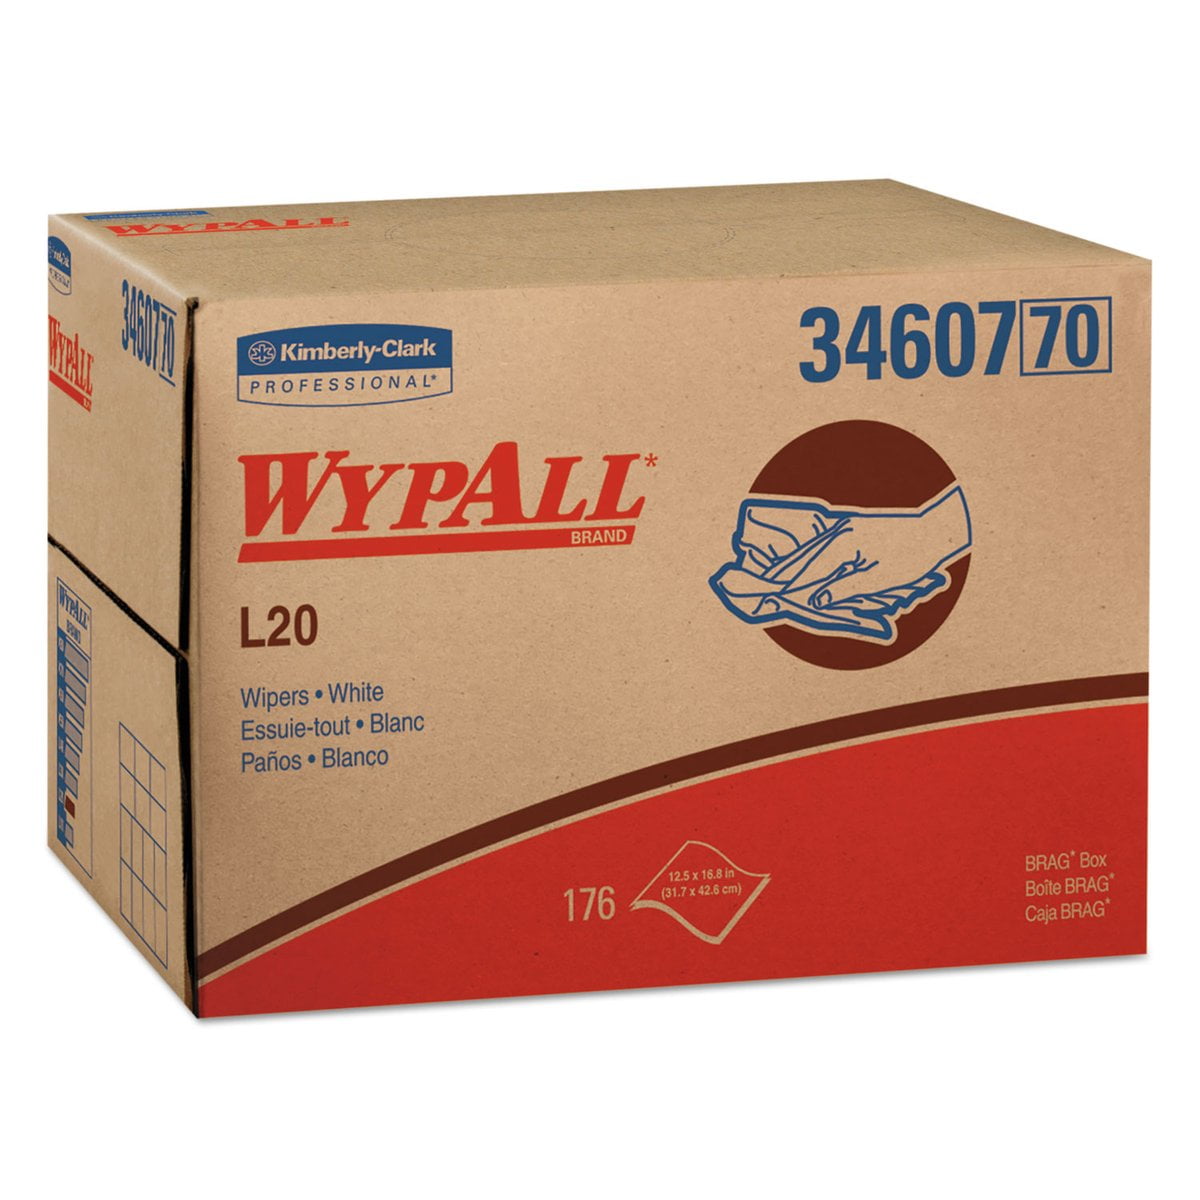 Kimberly-Clark 47033 Wypall L20 Wipers Brown 88/pop-up Box, 9 1/10 X 16 4/5 